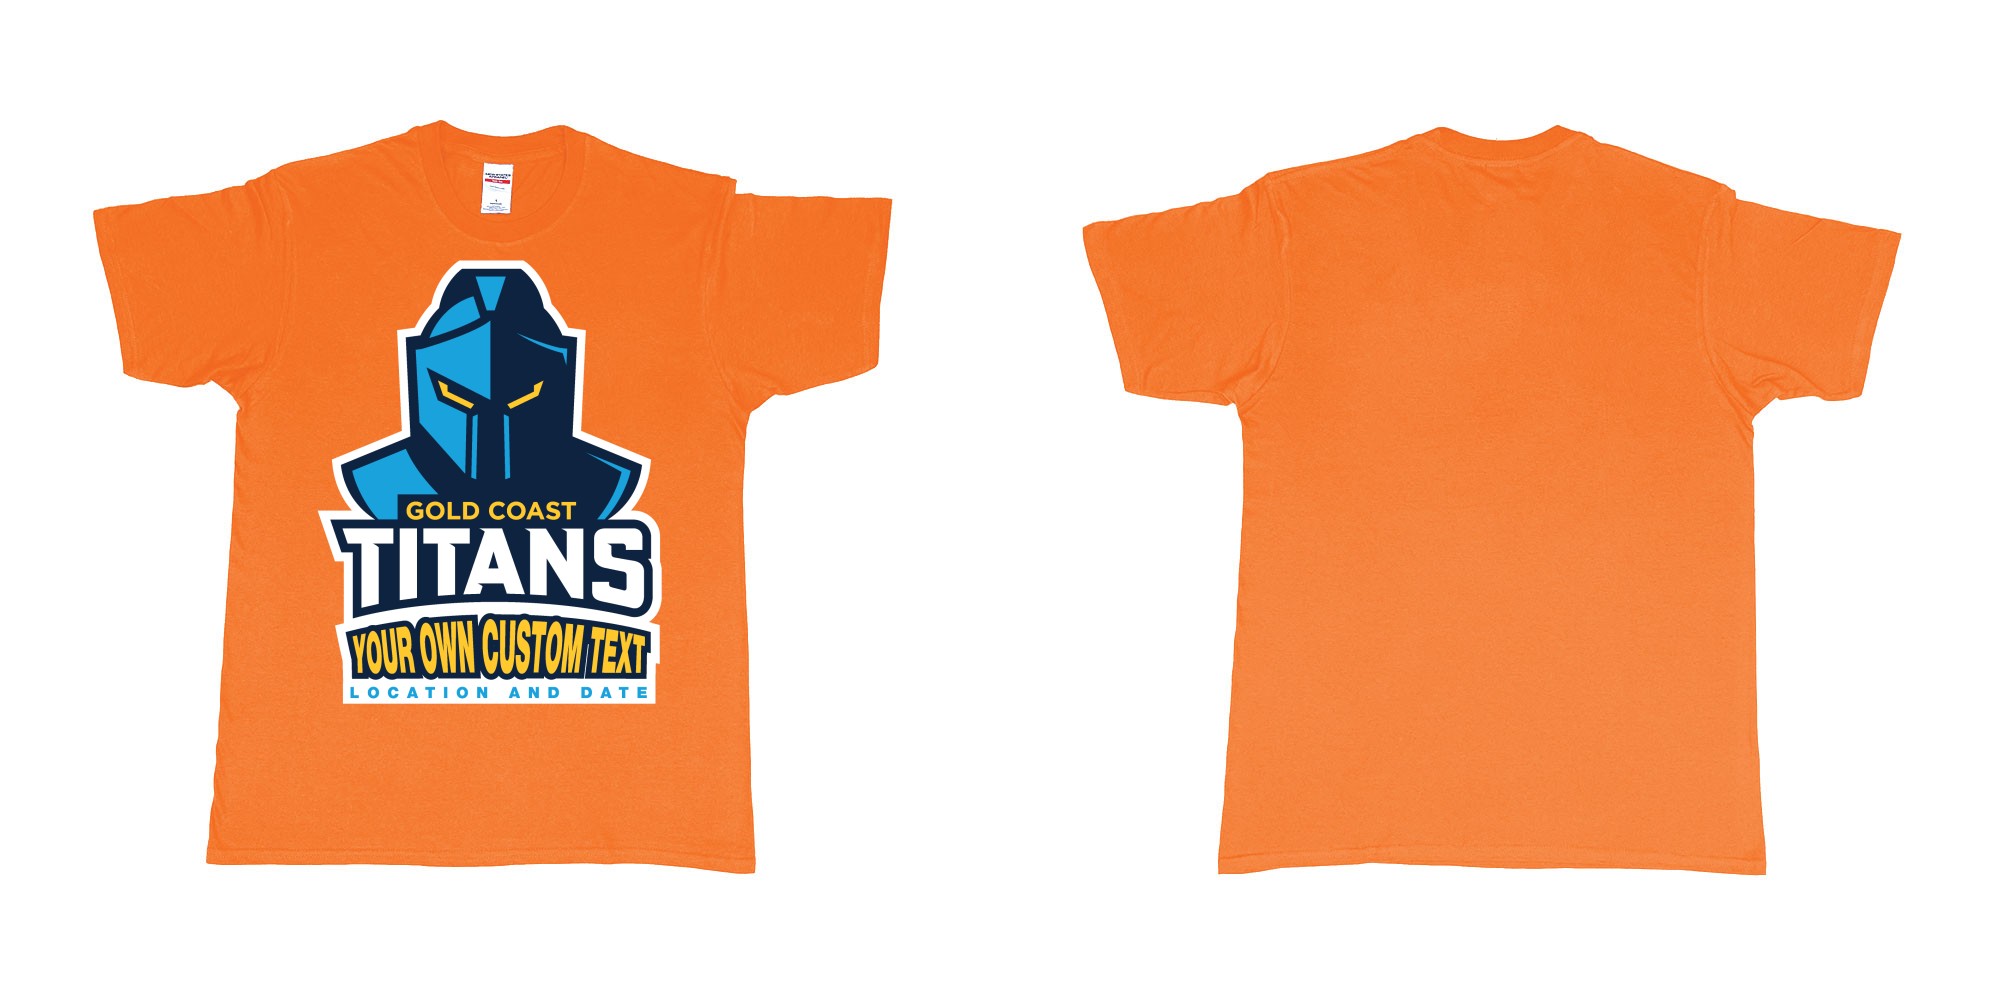 Custom tshirt design gold coast titans own custom design print in fabric color orange choice your own text made in Bali by The Pirate Way